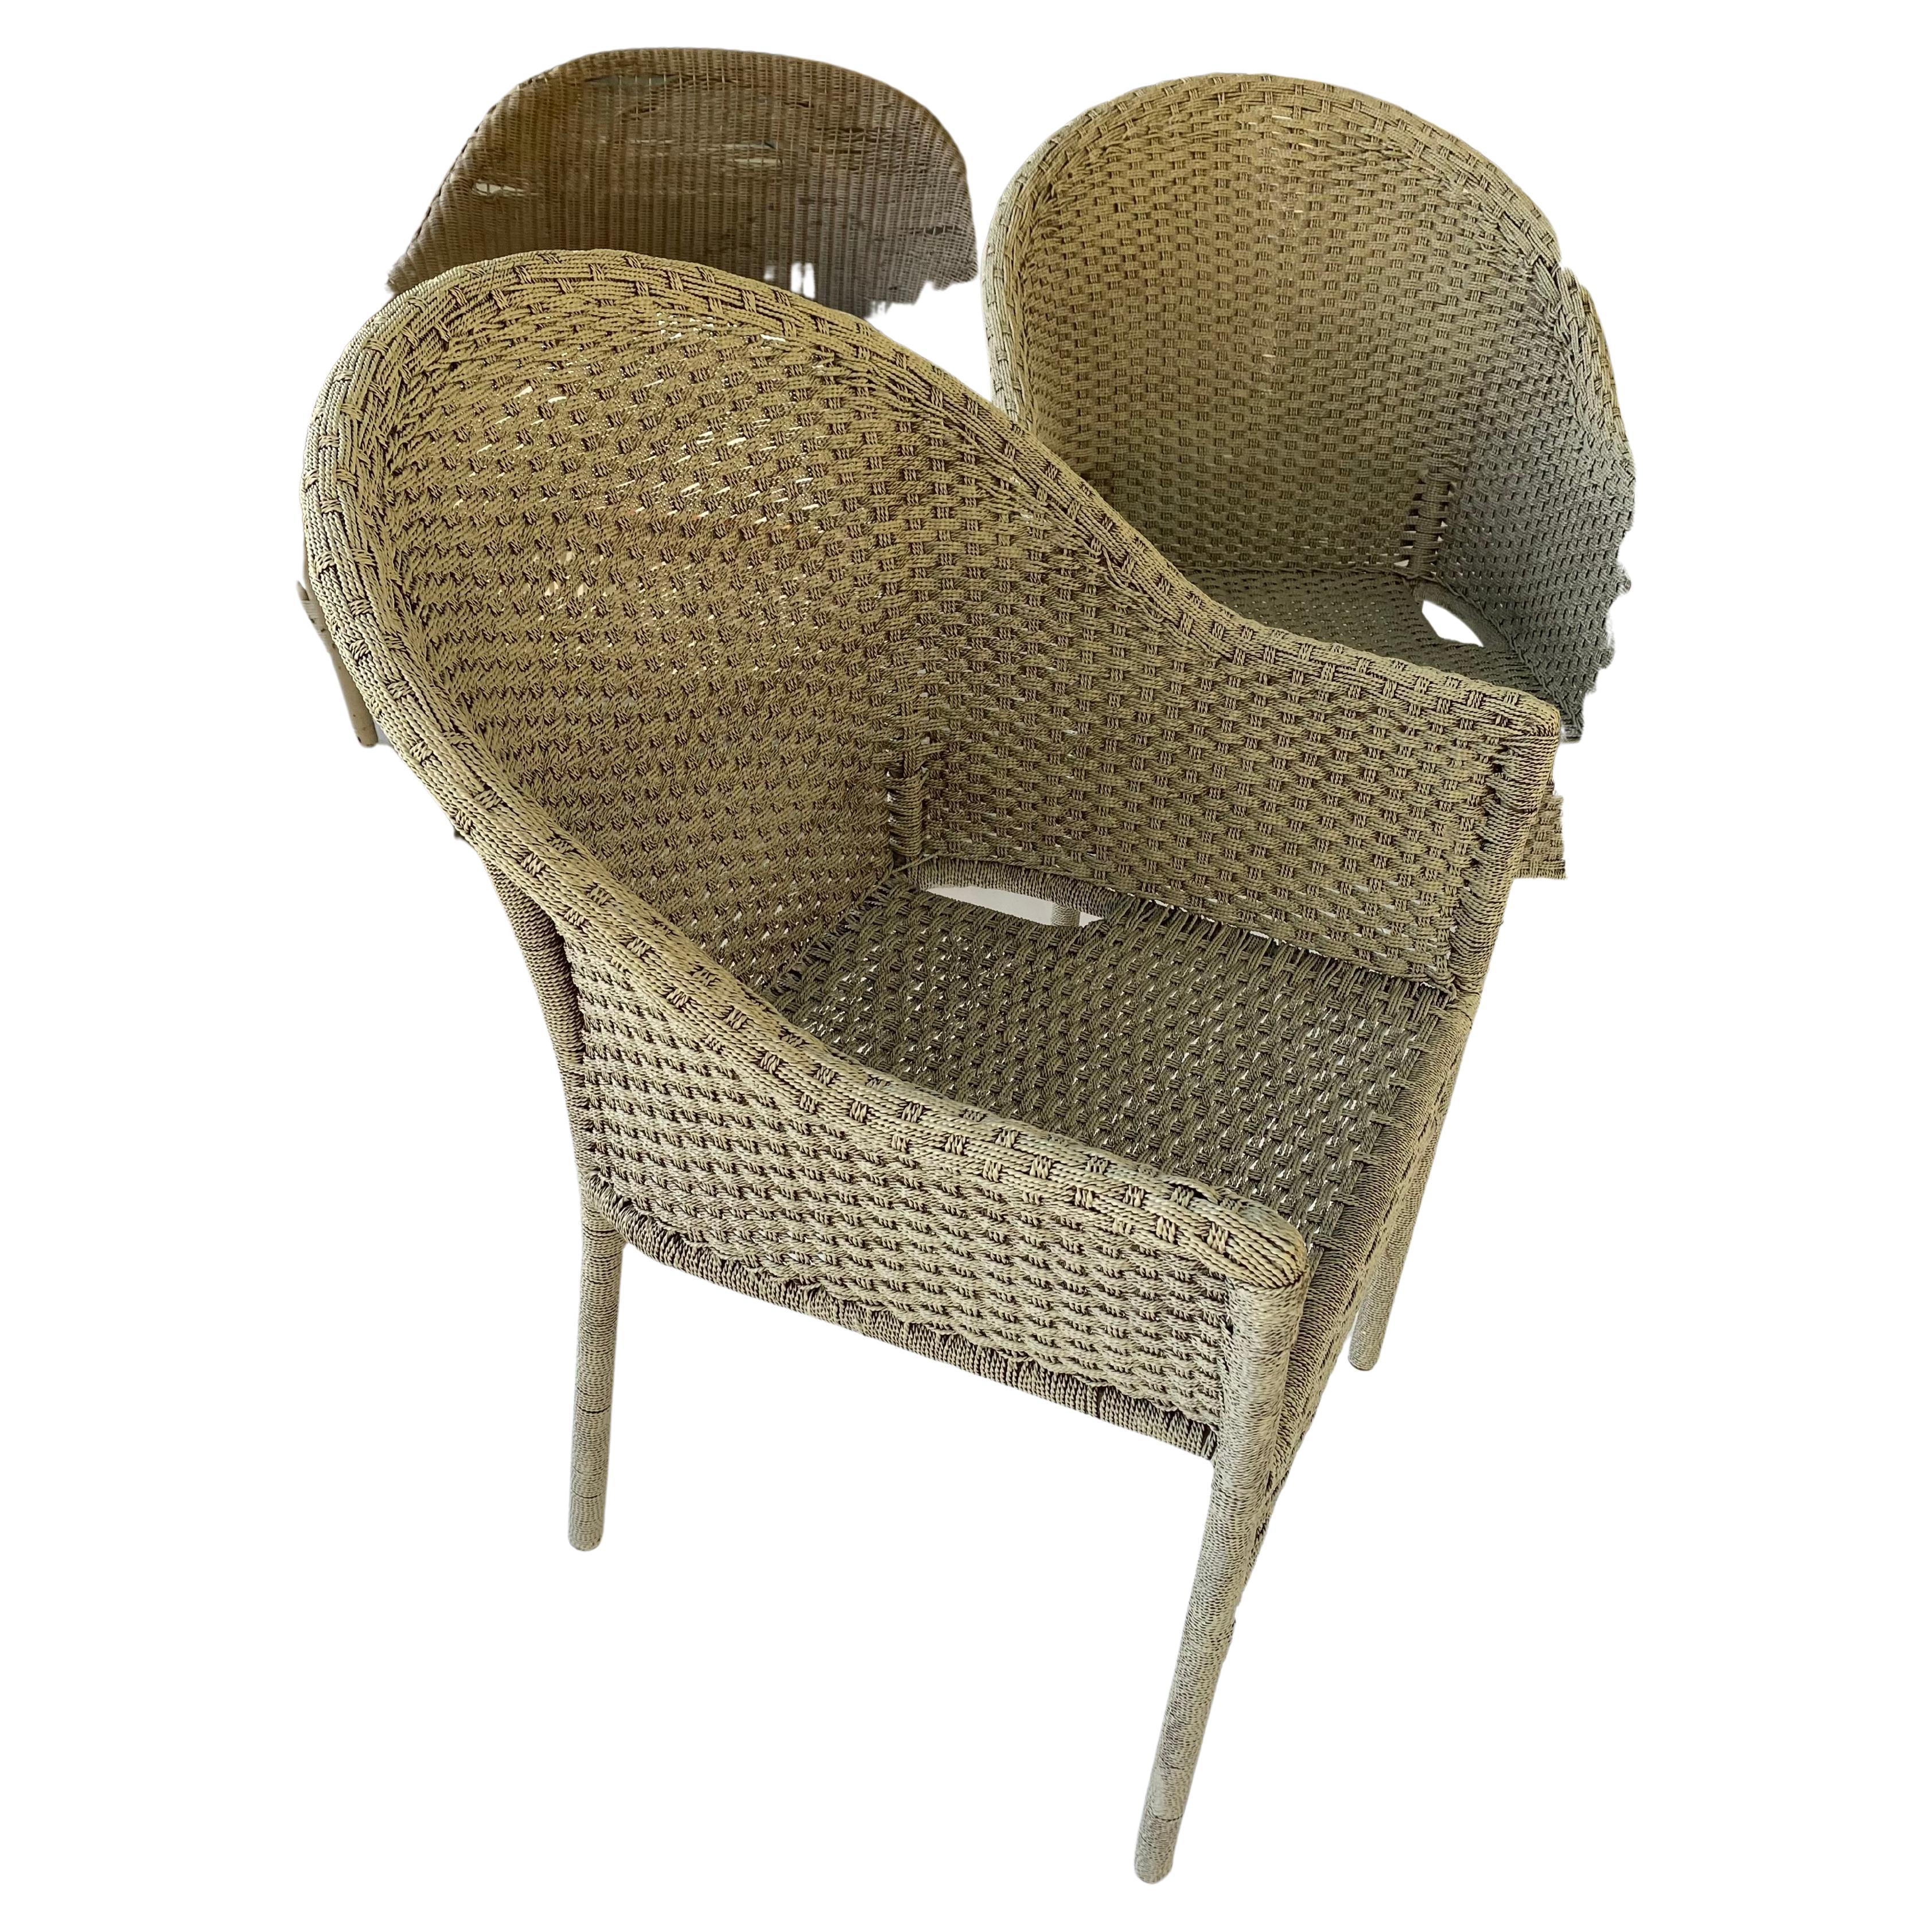 Set 4 outdoor woven armchairs crafted from a composite material. The chairs with the curved back gives it added comfort.  Wear is  consistent with age and exposure. Great for indoor or outdoor, patio or porch, garden dining or lounging.
These chairs